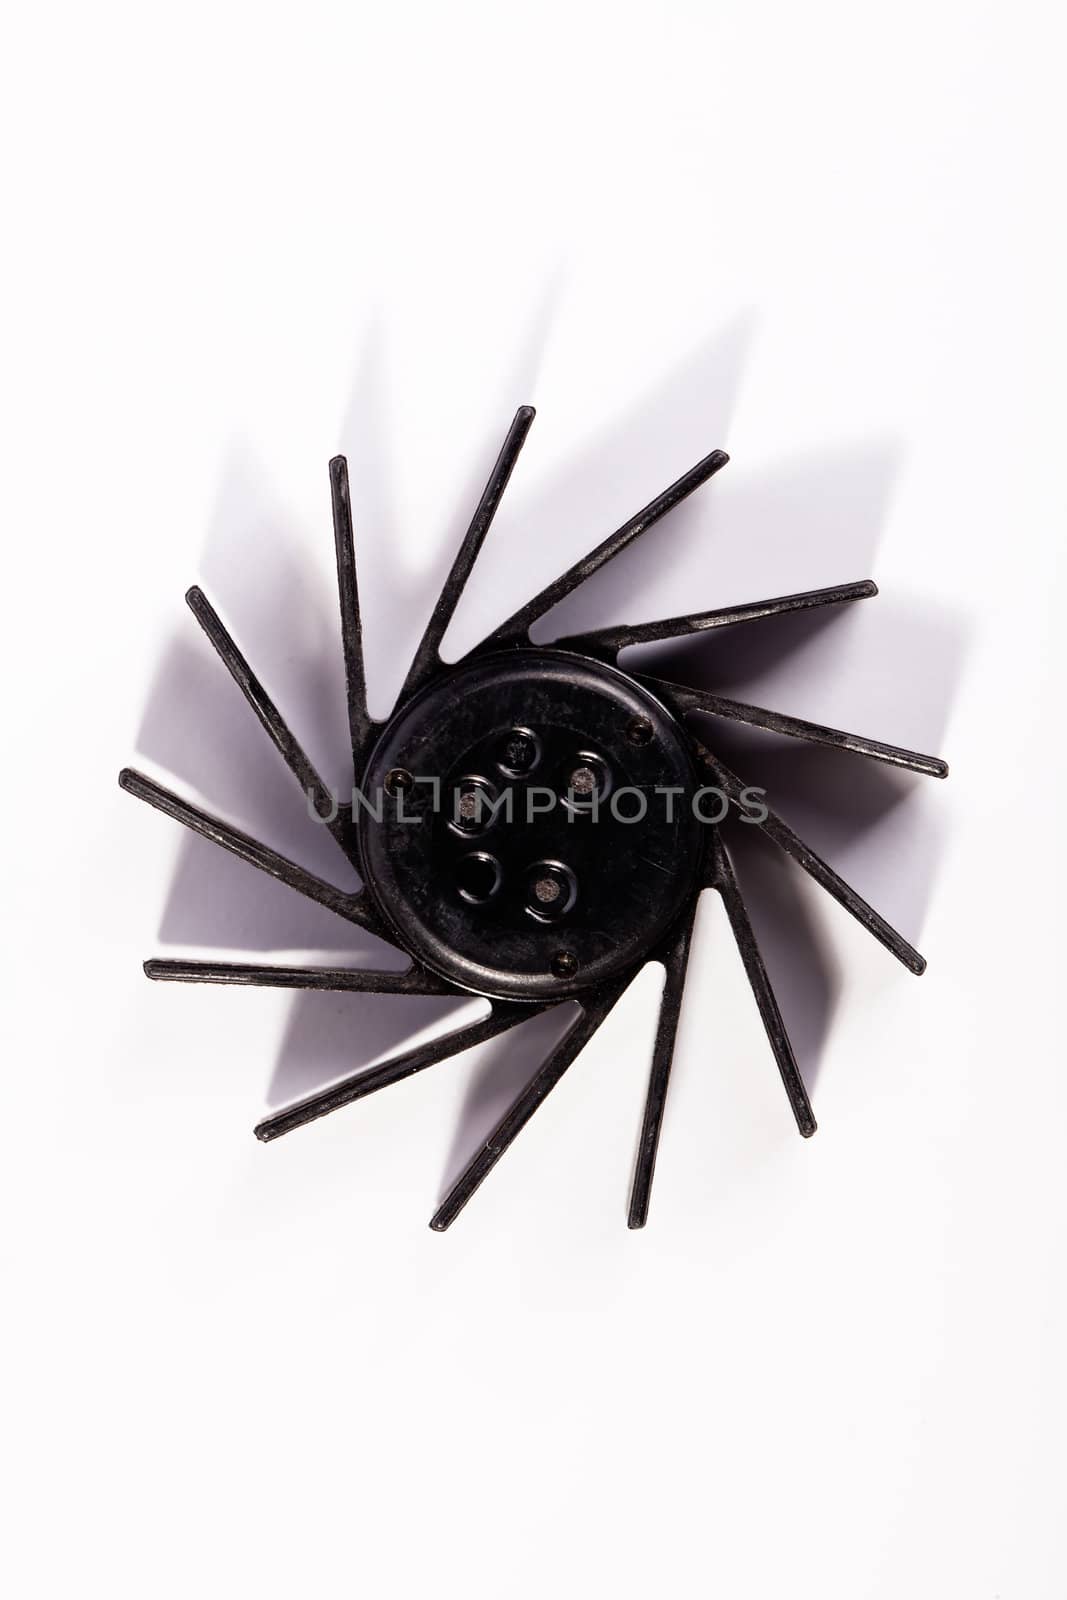 Laptop black fan front view on white background